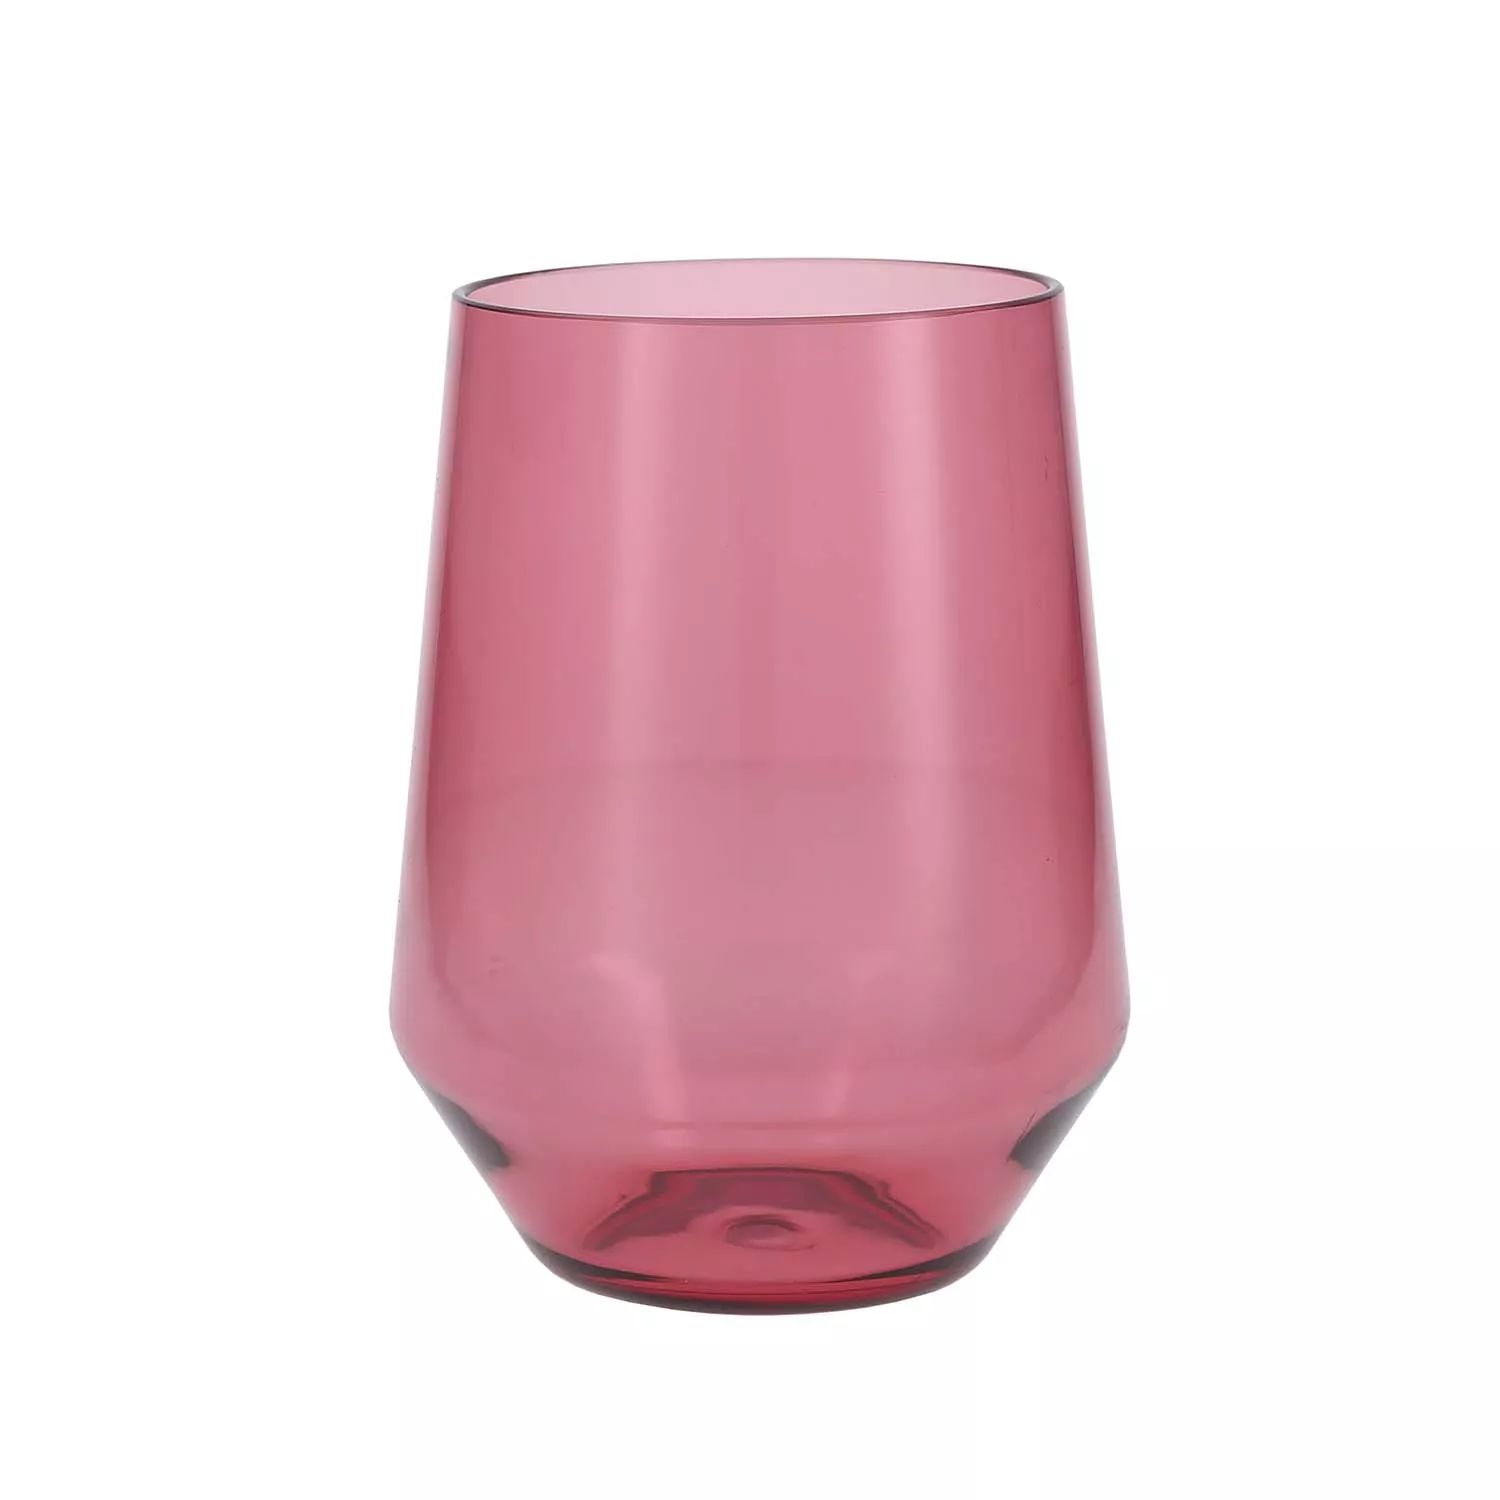 Fortessa Sole Outdoor Stemless Wine Glasses, Set of 6